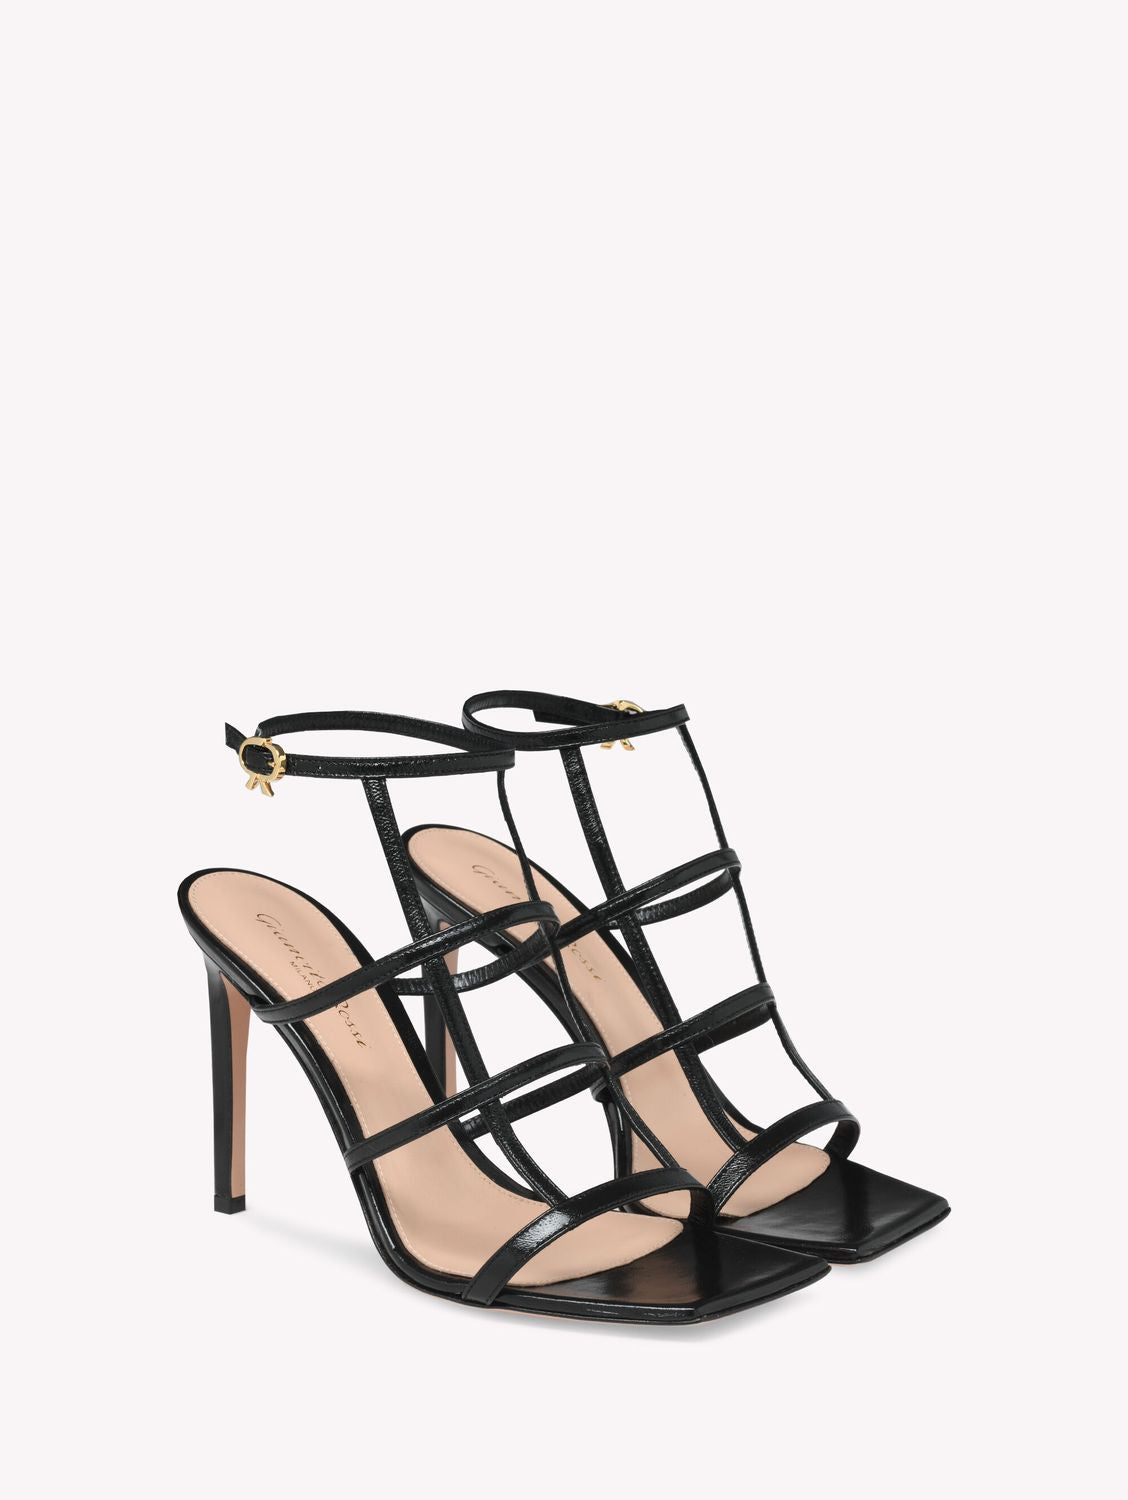 GIANVITO ROSSI Stylish Red Sandals for Women - FW24 Collection